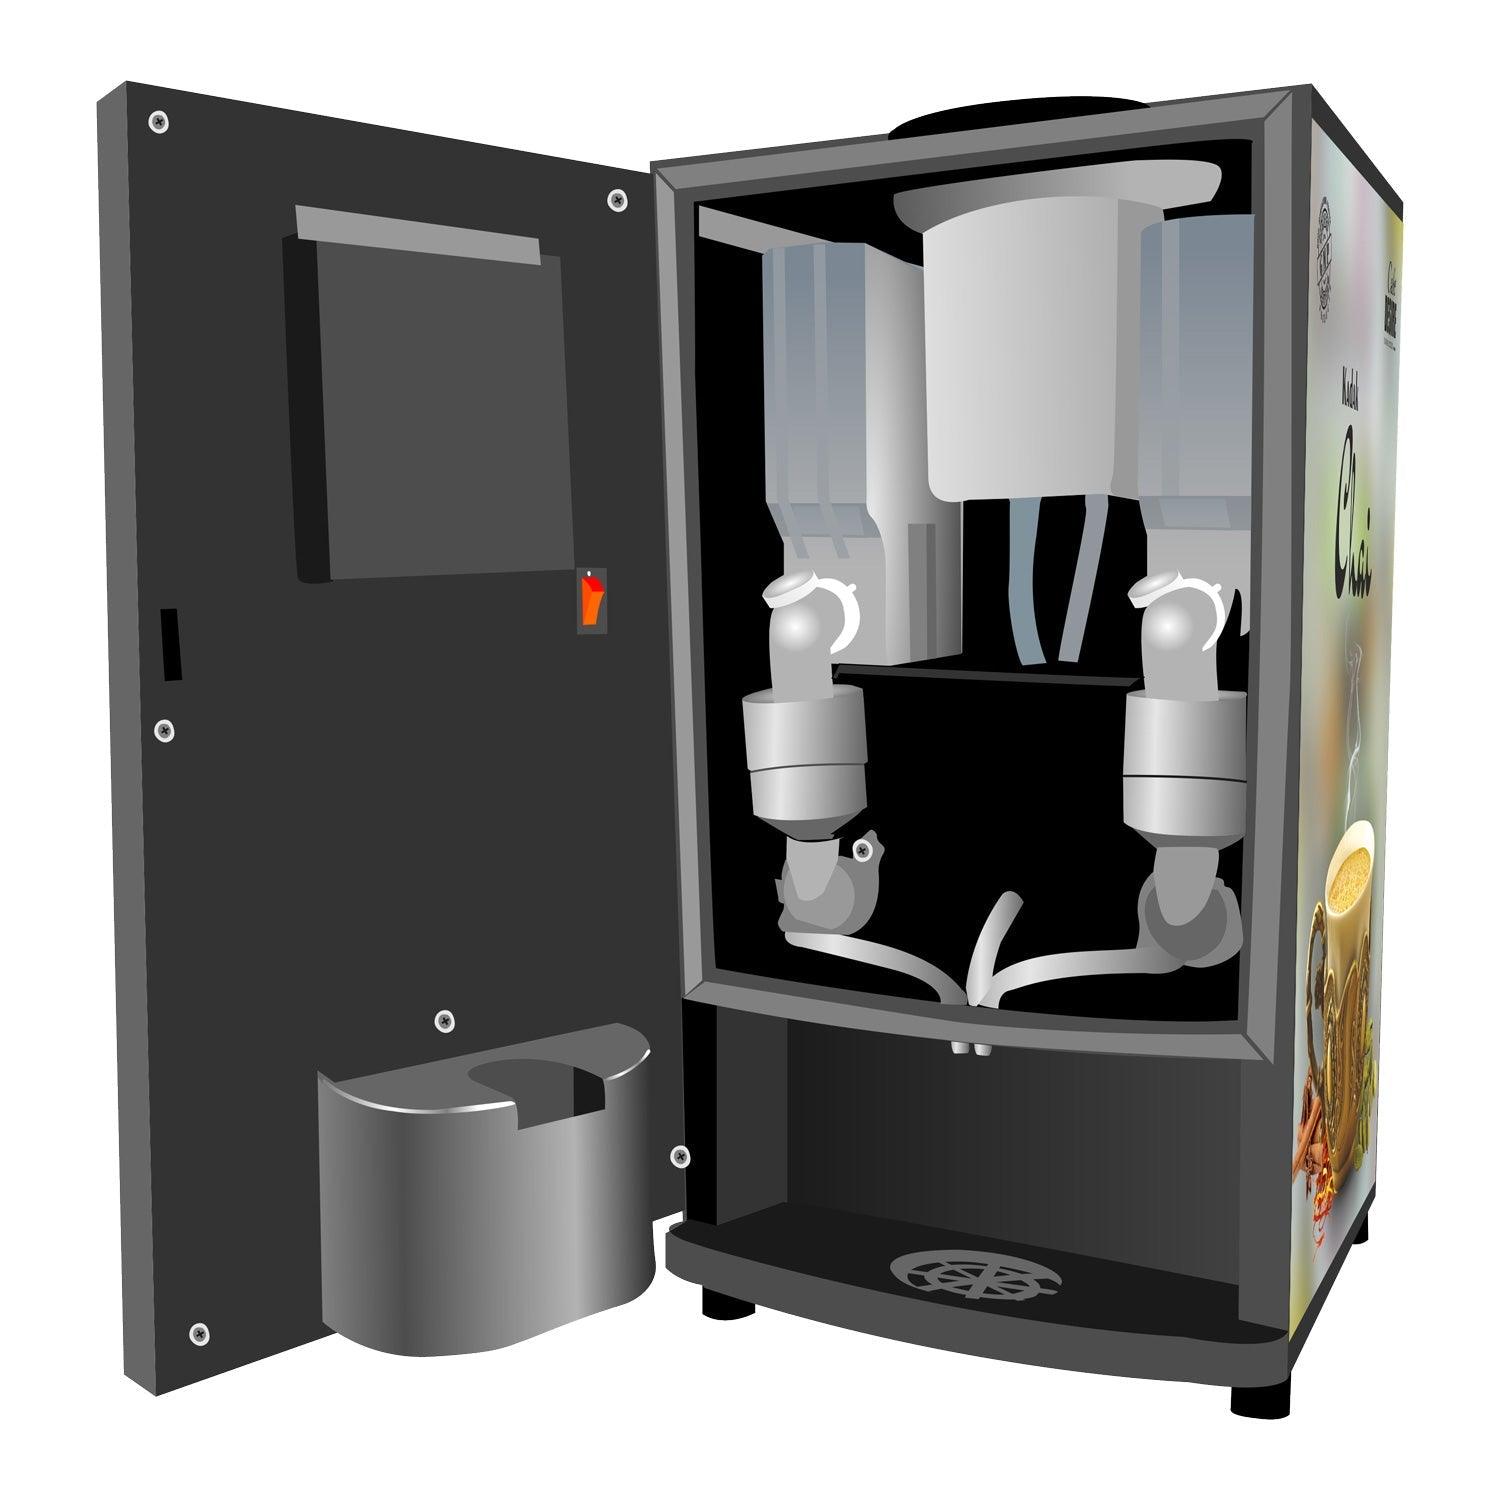 Pump Model - Coffee Tea Vending Machine - 2 Lane | Two Beverage Options | Fully Automatic Tea & Coffee Vending Machine | For Offices, Shops and Smart Homes | Make 2 Varieties of Coffee Tea with Premix - cd-usa.com